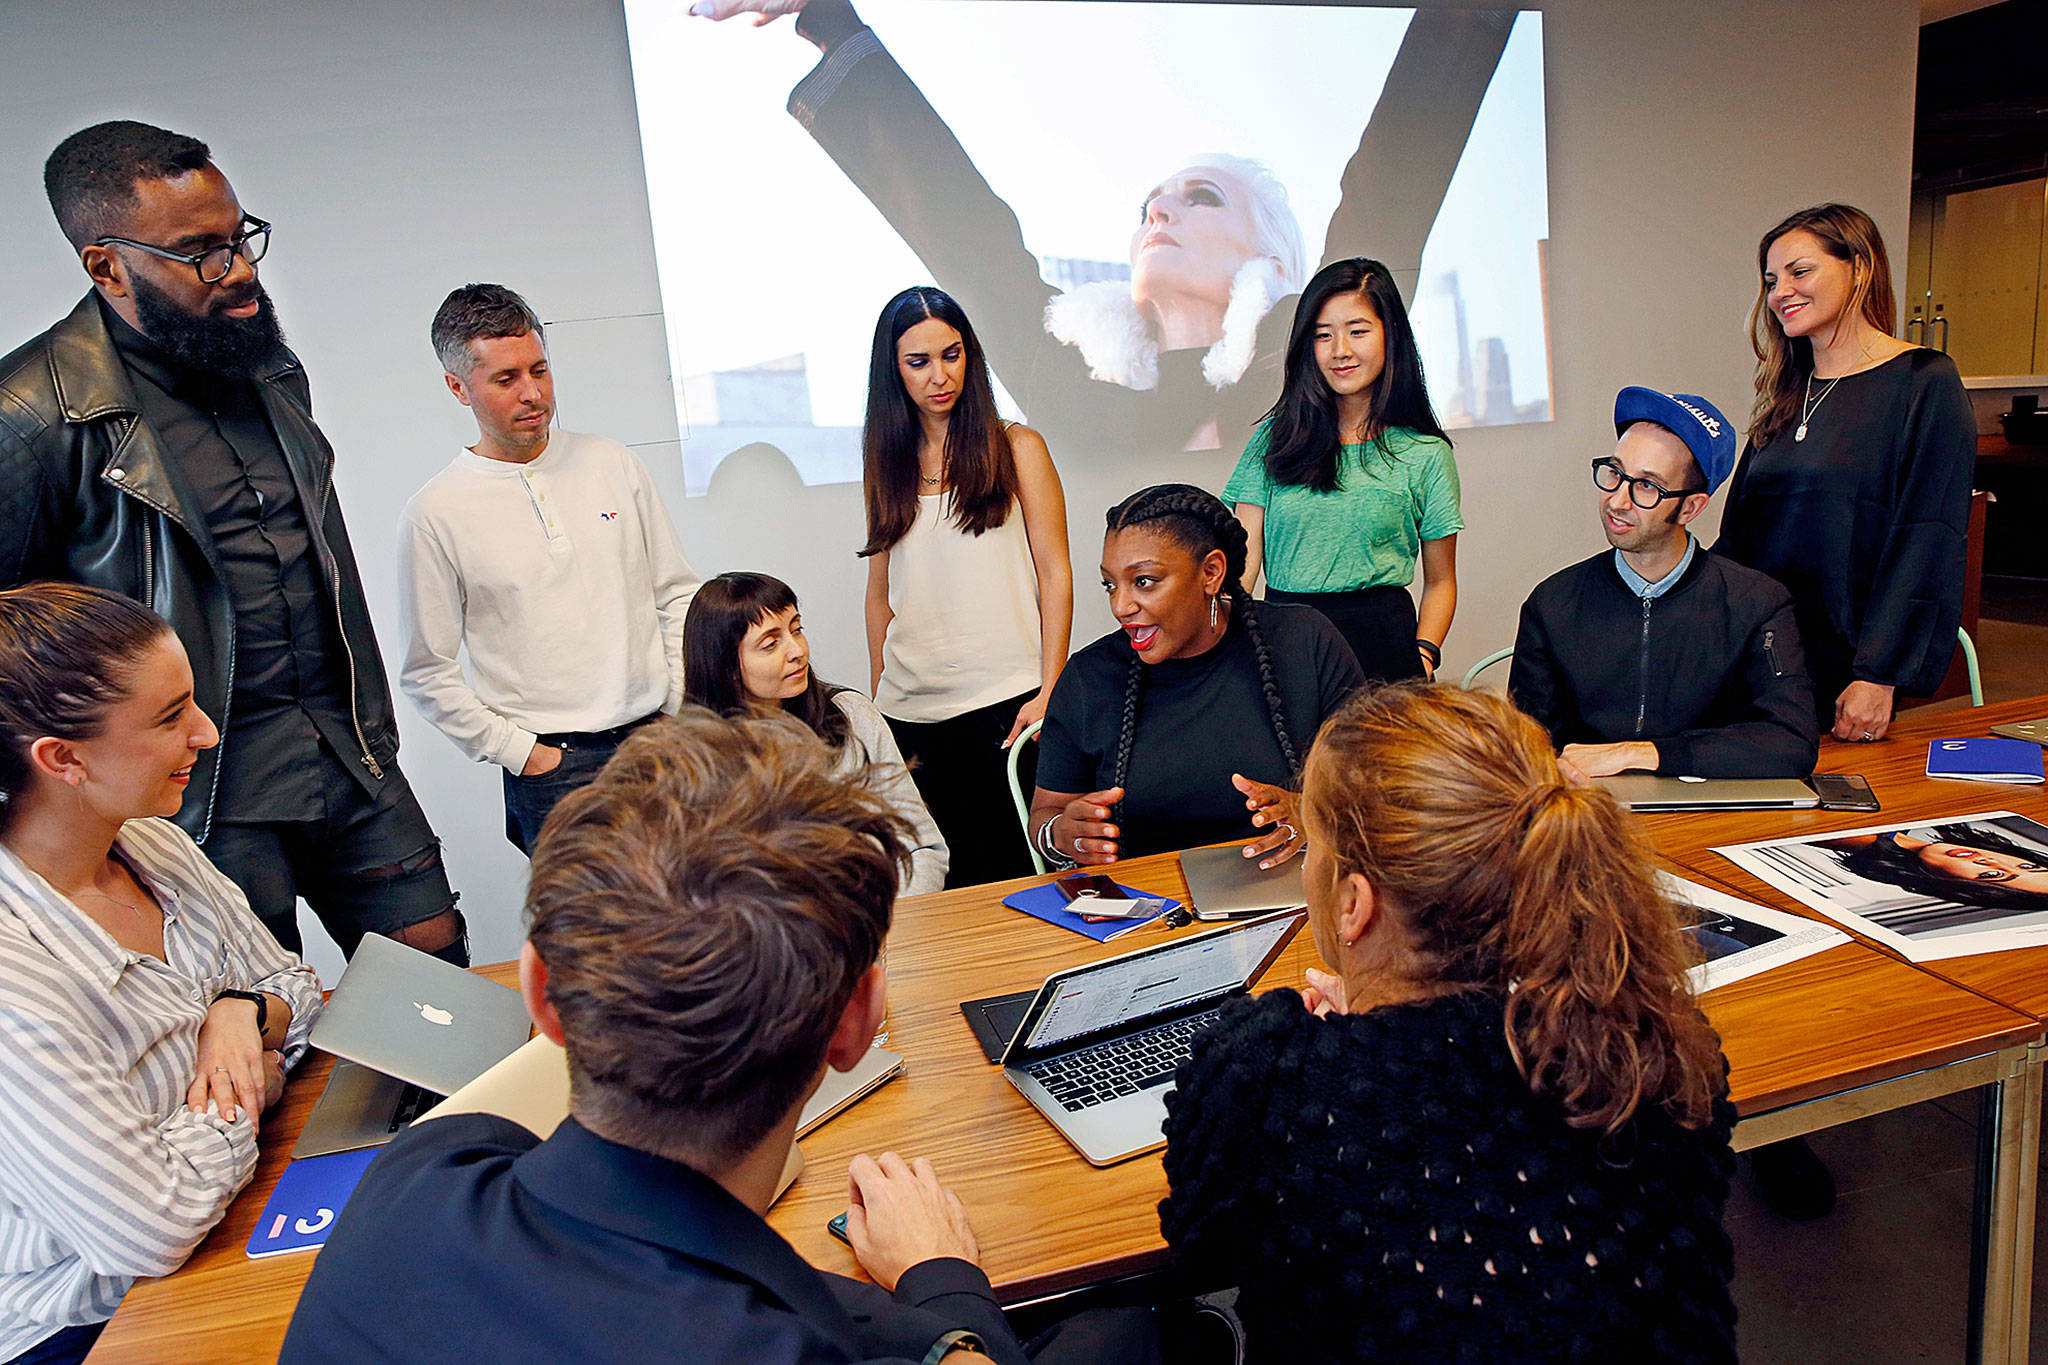 Members of the Droga5 team behind the recent CoverGirl campaign talk about that campaign during a meeting at the advertising agency’s headquarters in New York on Tuesday. (AP Photo/Kathy Willens)